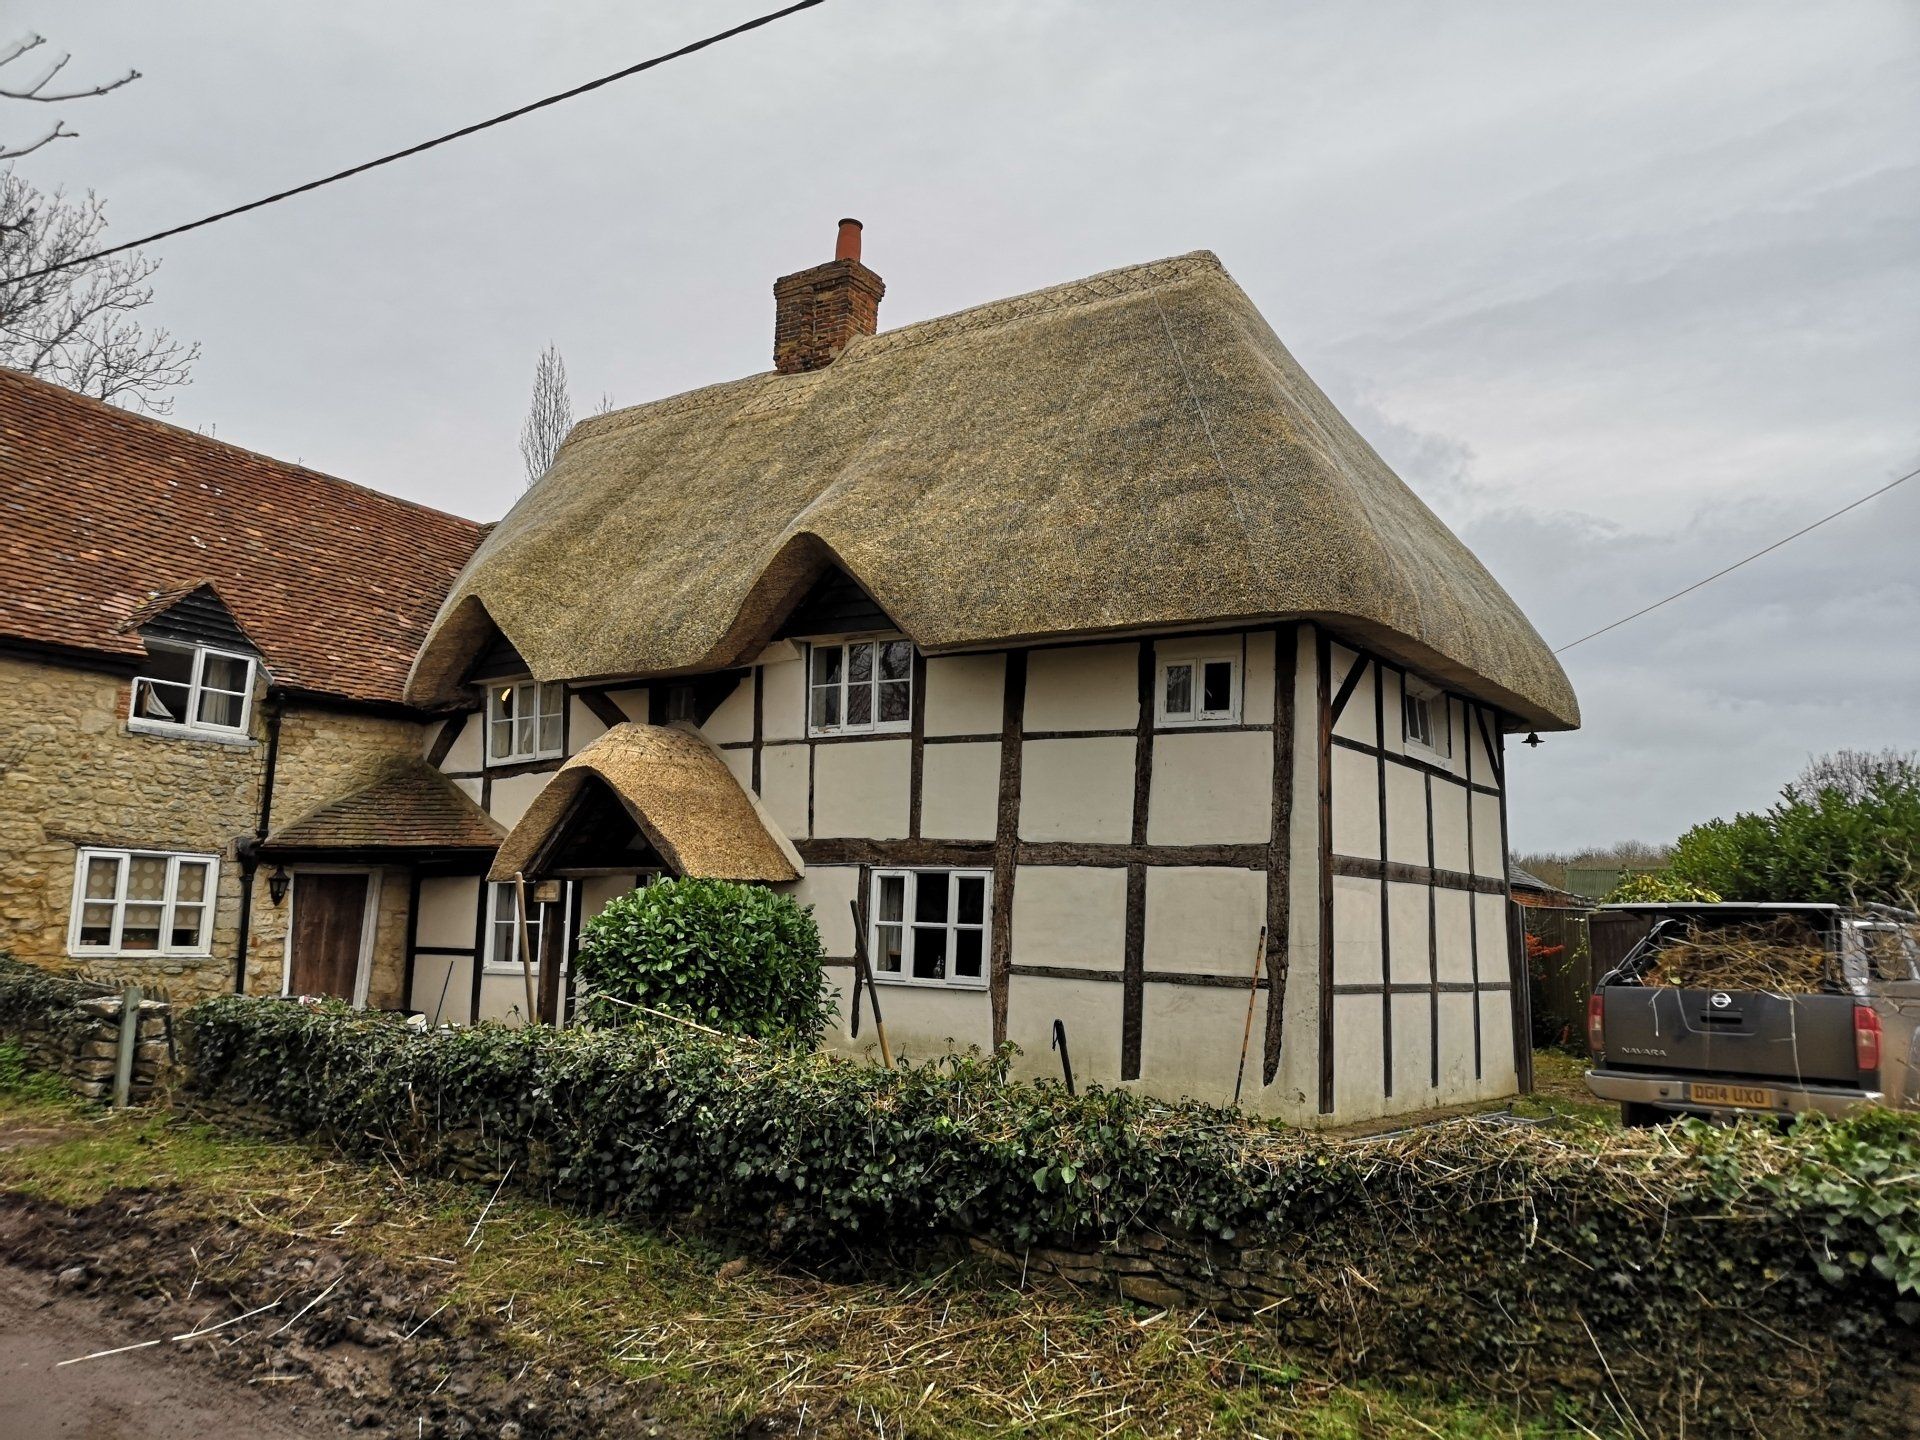 Thatched house and porch near Oxford